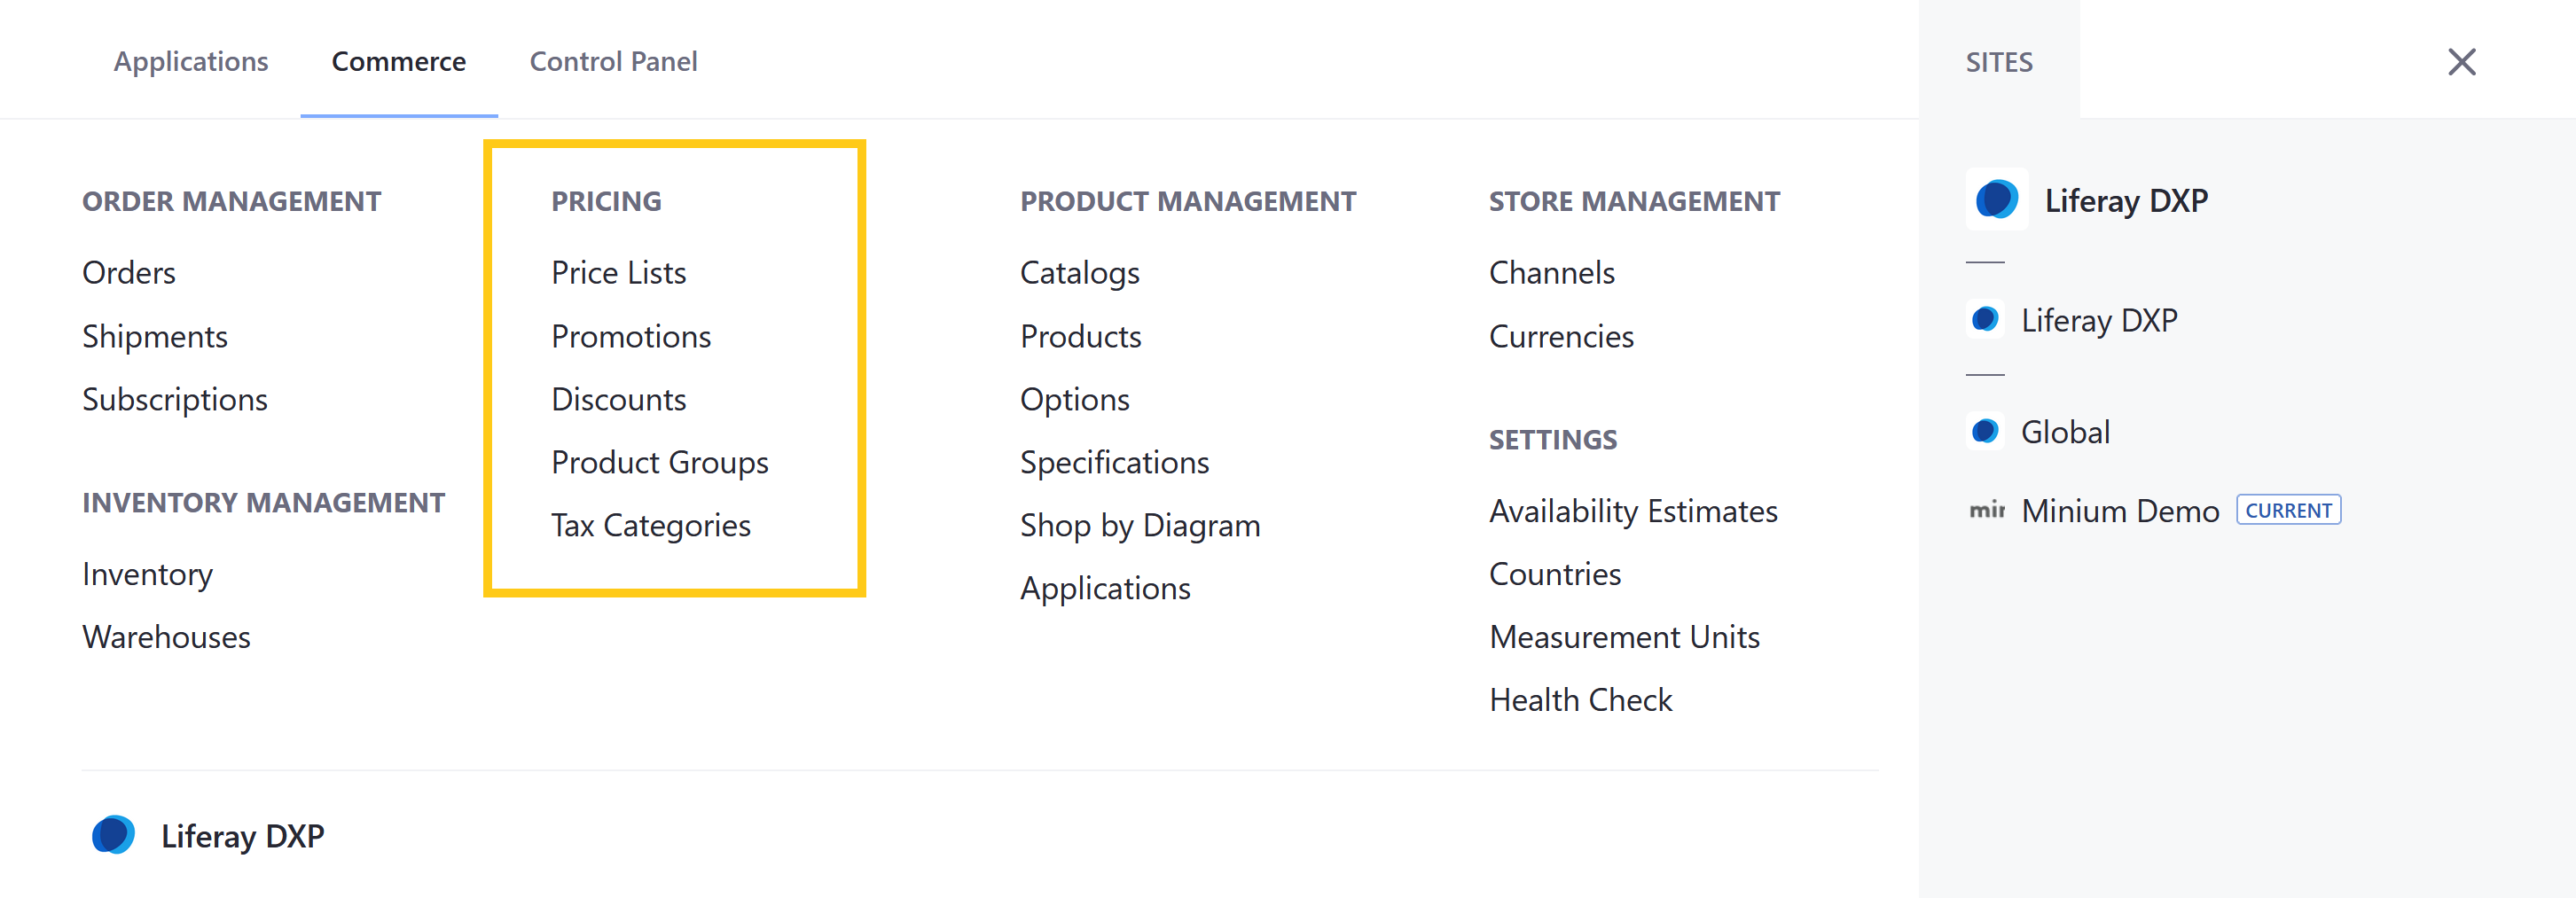 Control access to Pricing applications and resources.